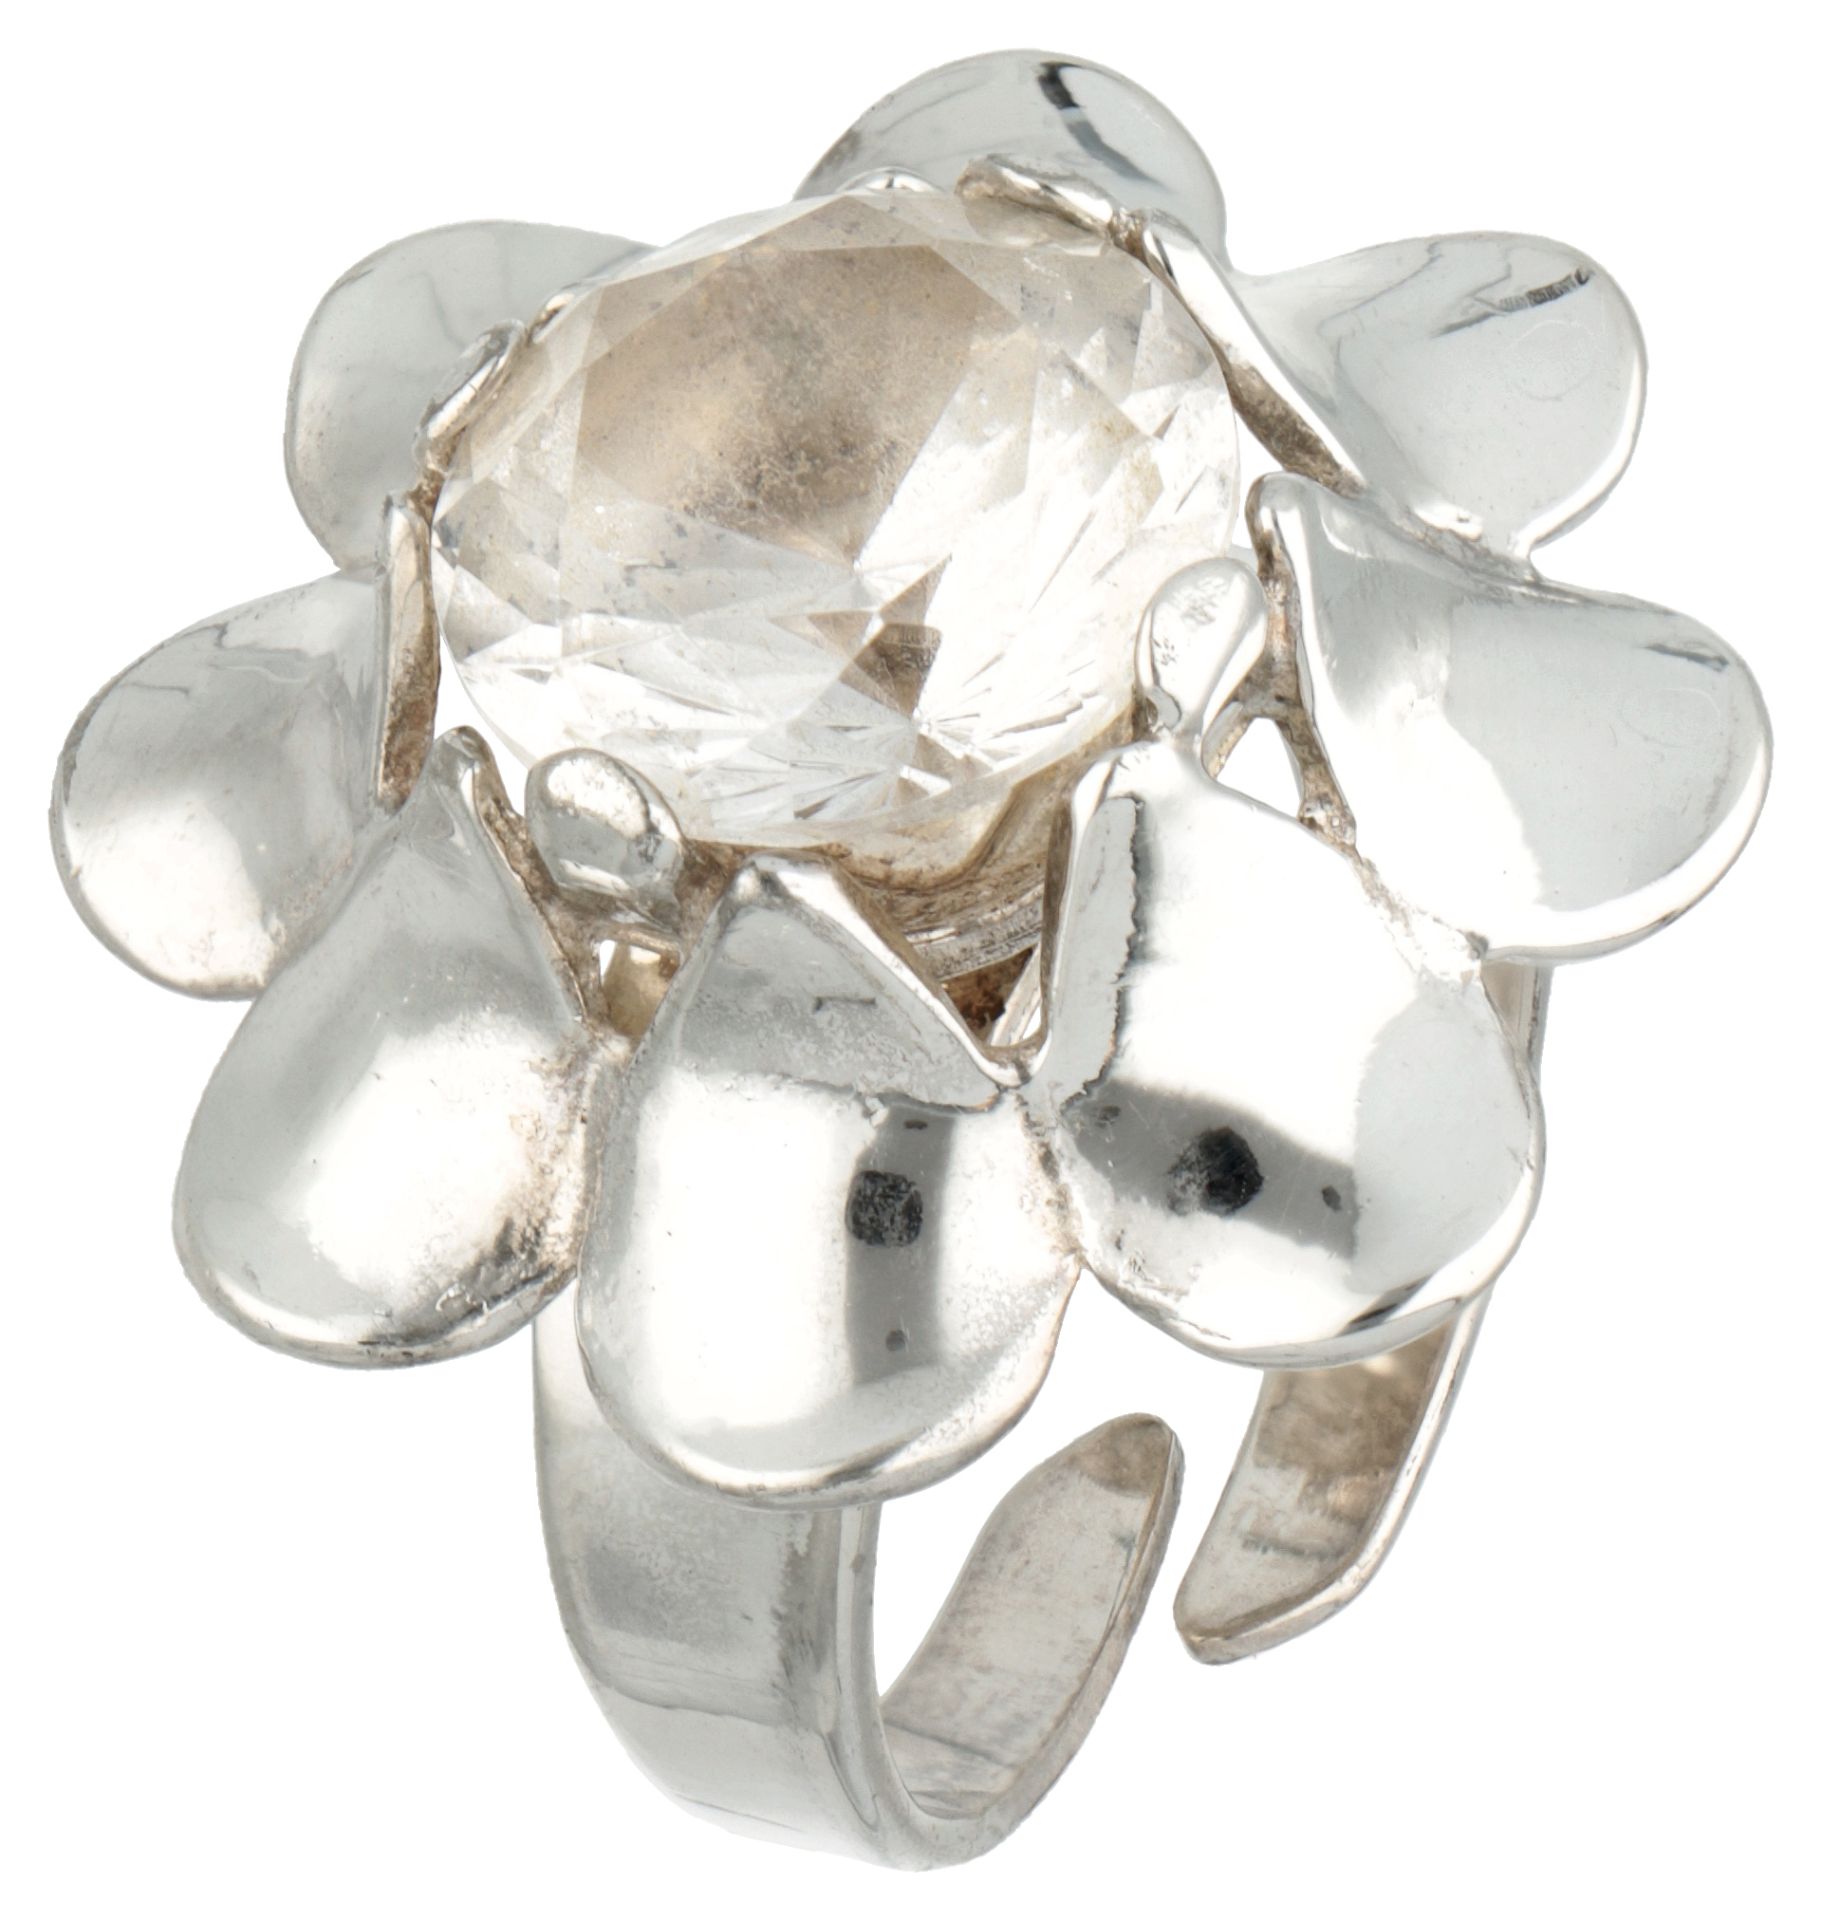 Alton Palmberg silver ring with flower-shaped centerpiece set with synthetic spinel.